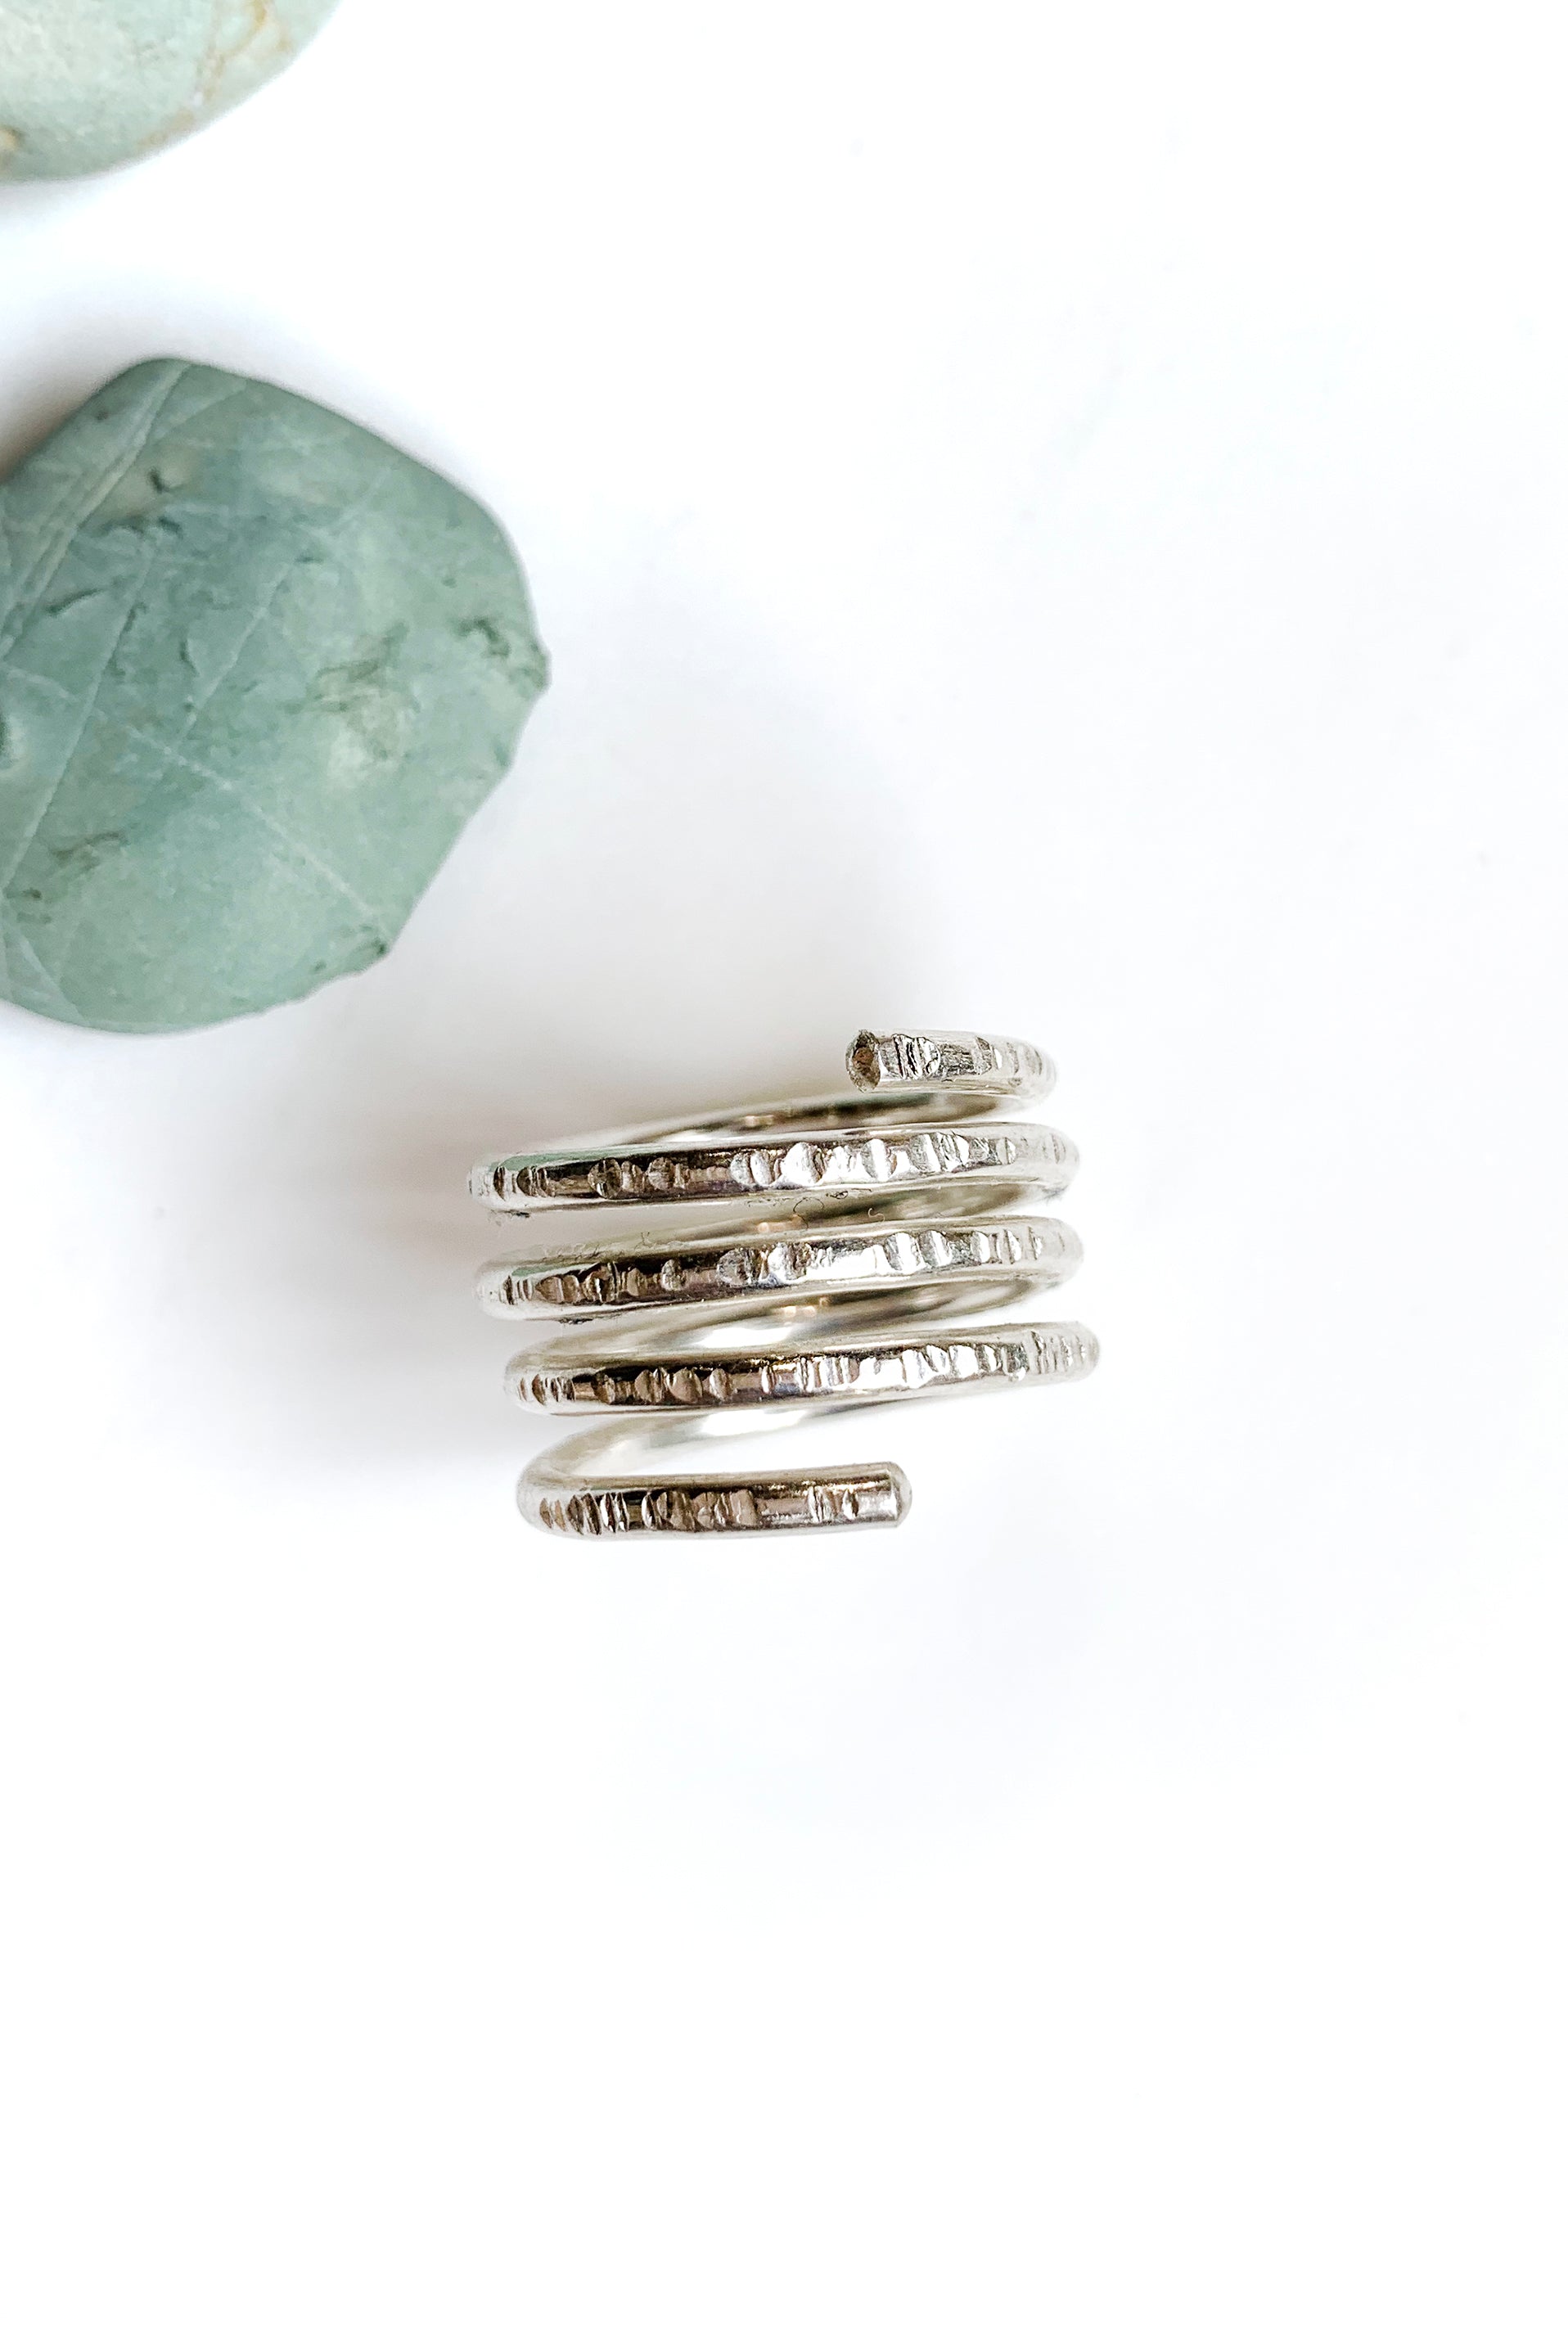 Silver Coil Ring